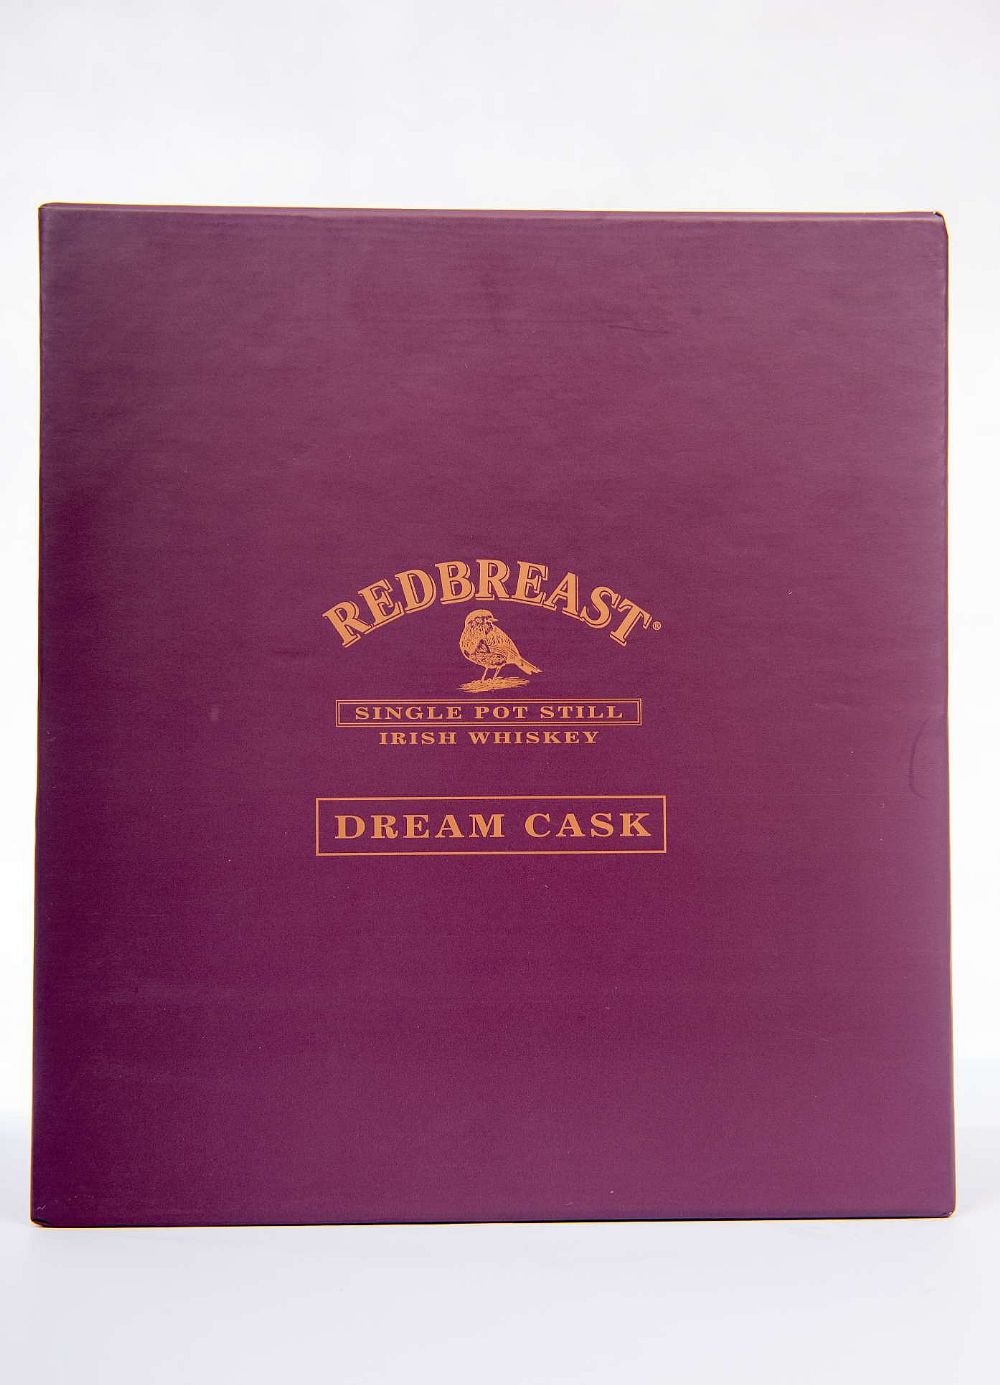 Redbreast Dream Cask 32 year old, Sherry Cask Edition